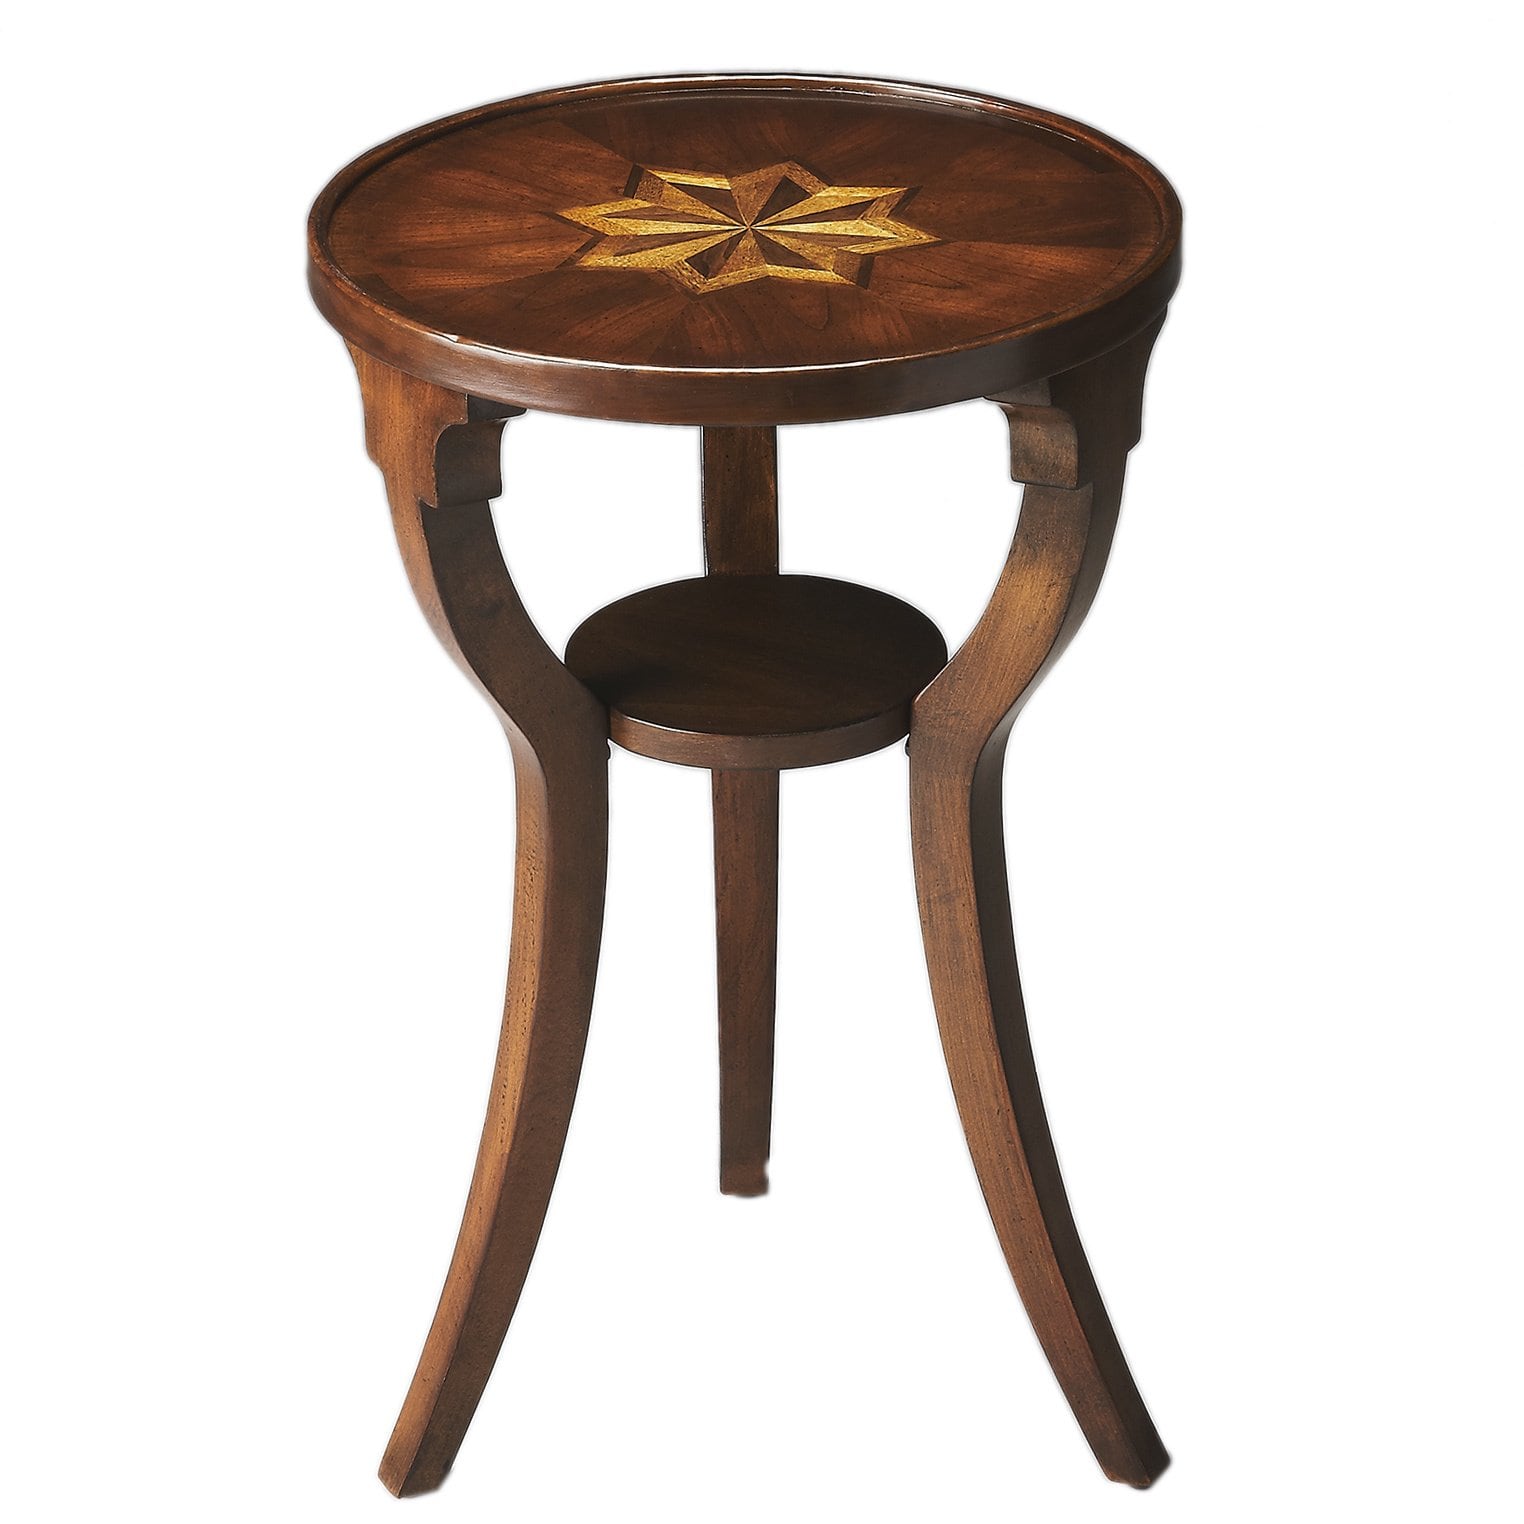 round cherry finish accent table free shipping today ballard designs outdoor furniture vintage marble top matching side tables mosaic patio rustic wood and metal coffee sofa lamps